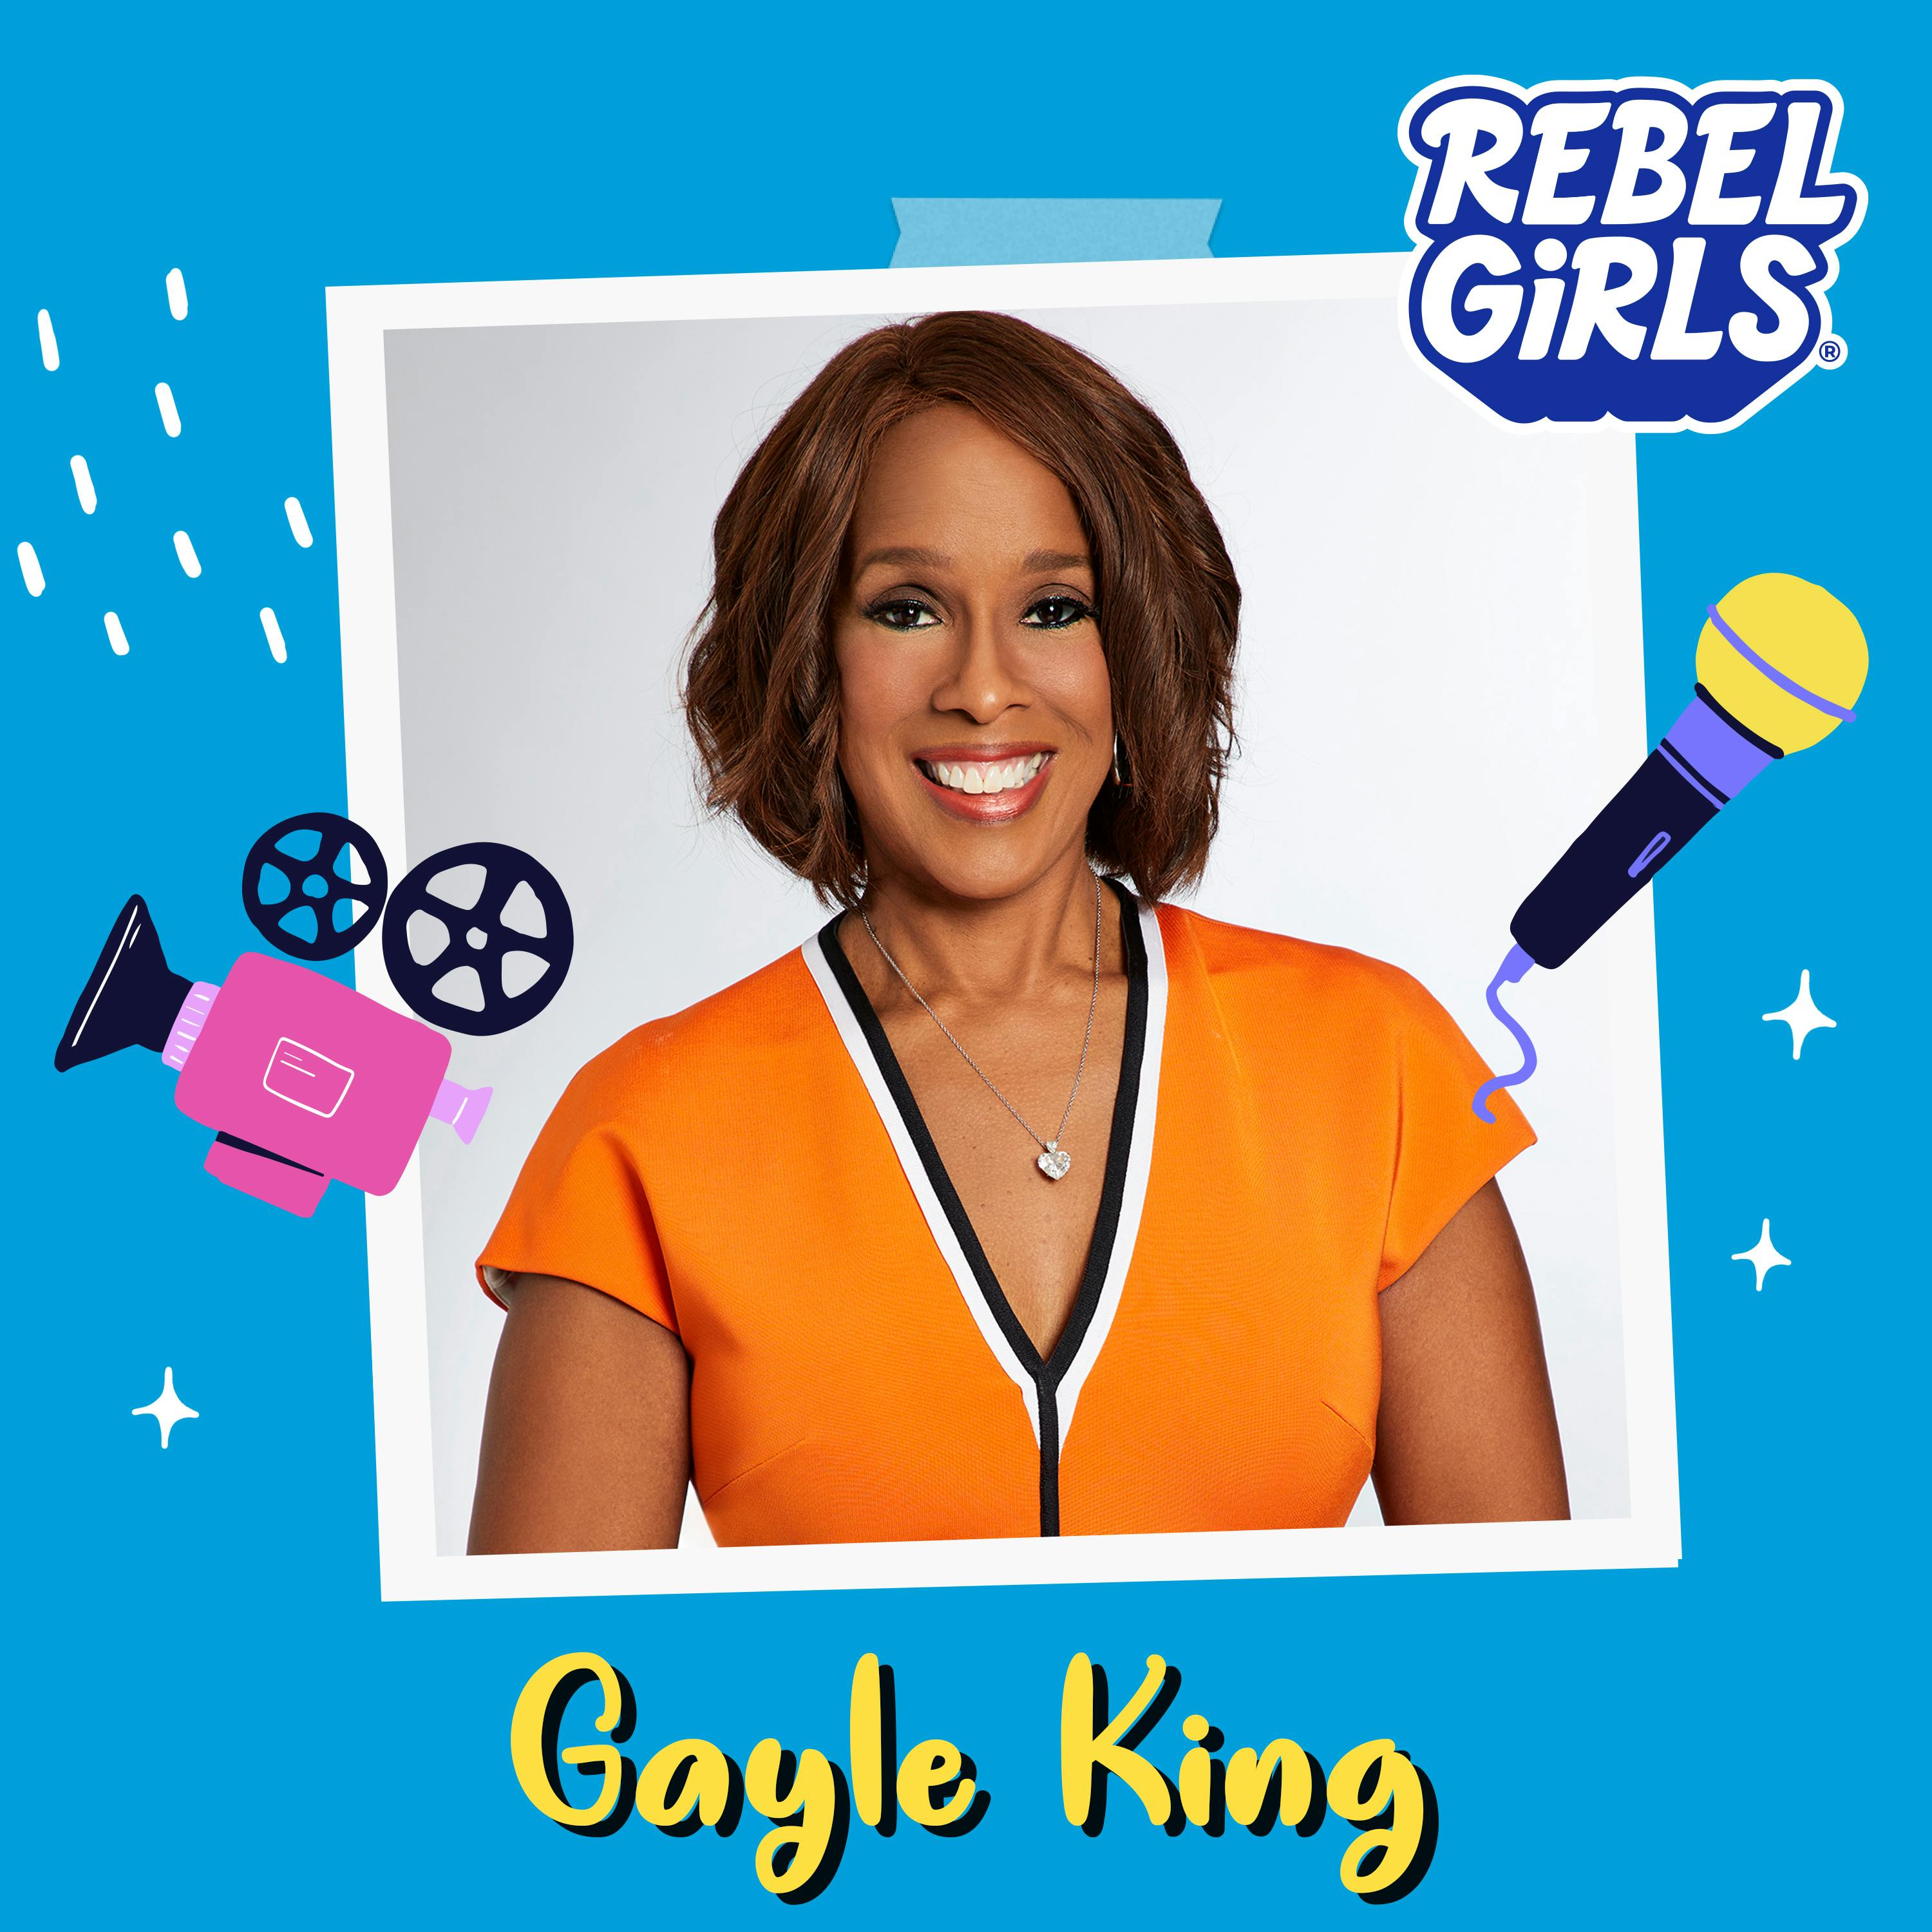 Get to Know Gayle King